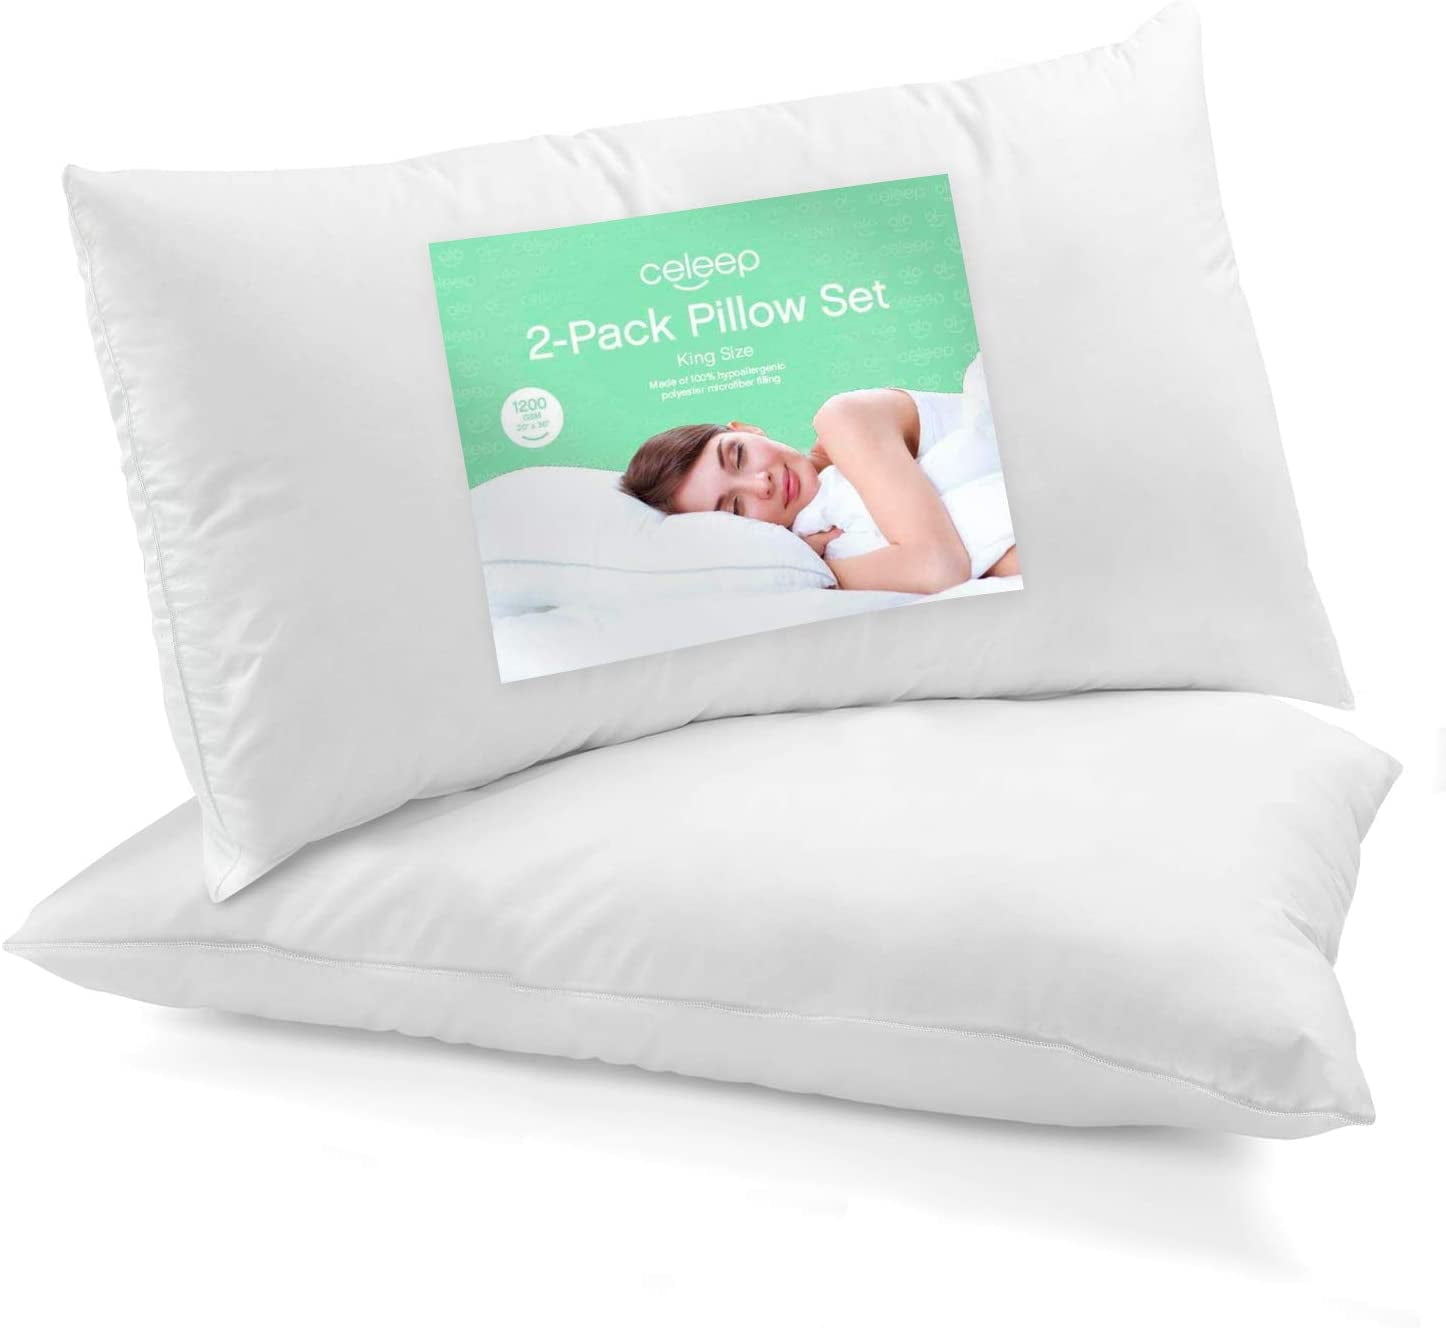 BED PILLOWS Protector King Size Set Hypoallergenic Microfiber Sleep 36x20 2 PACK 